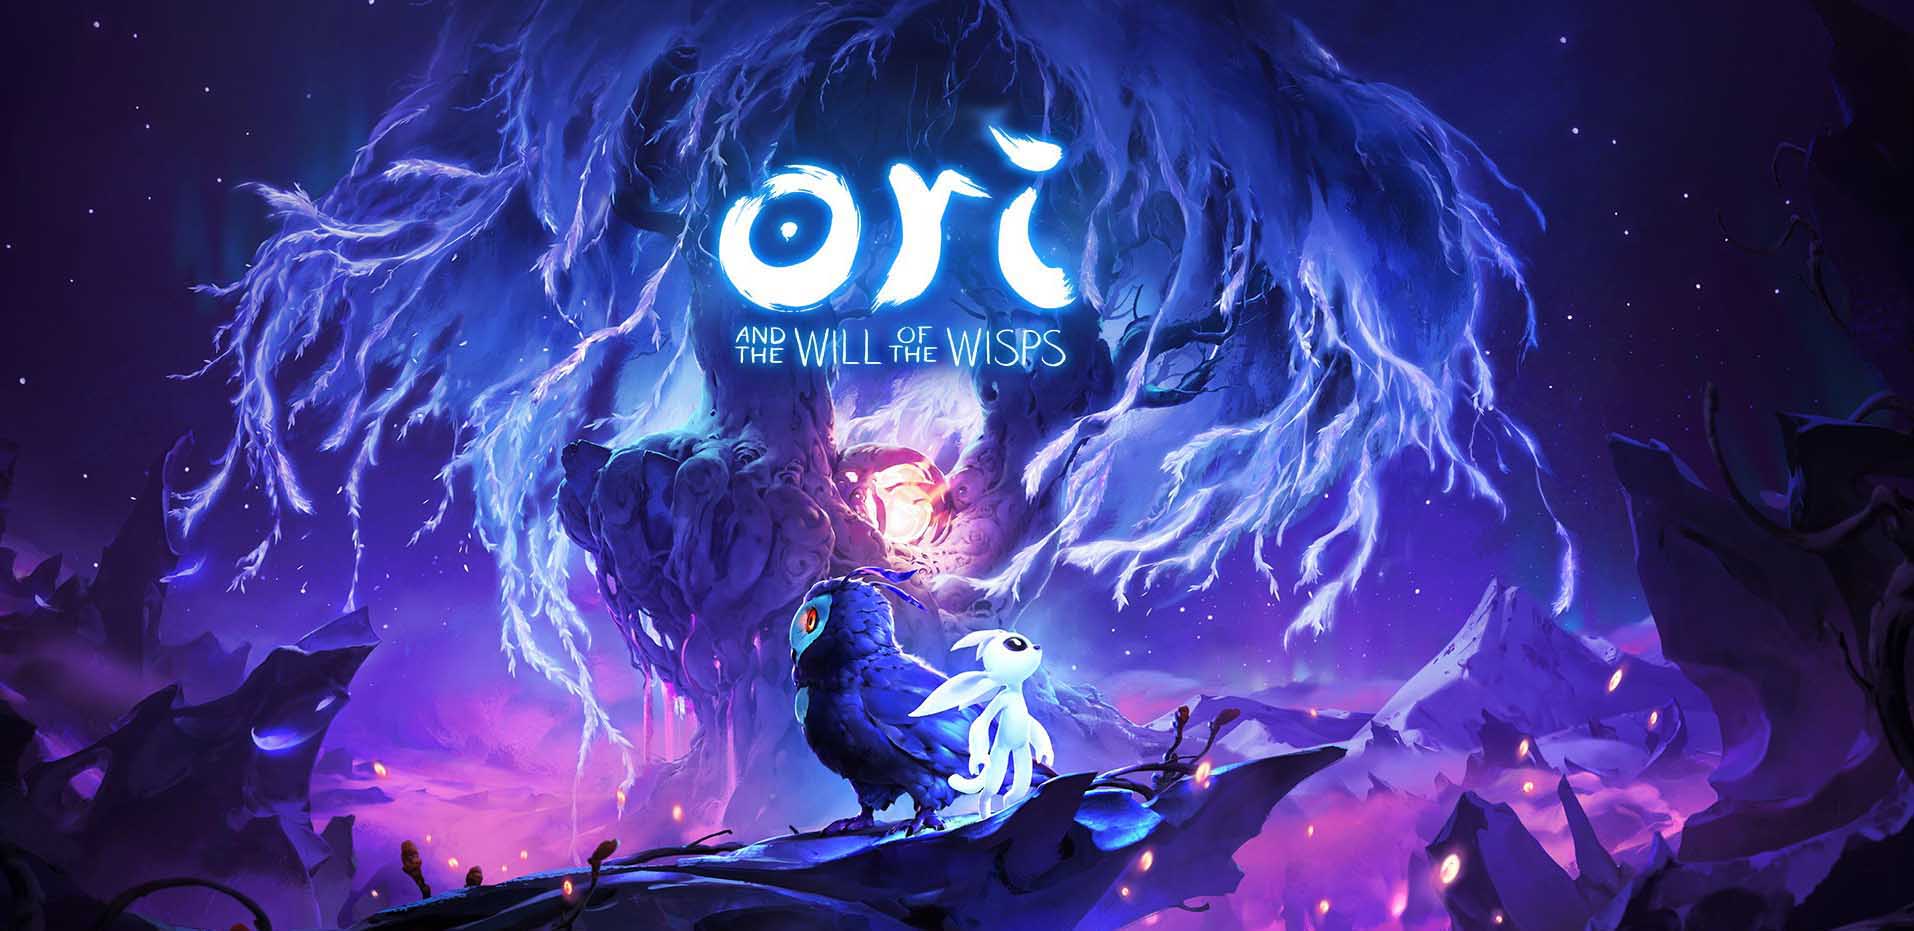 Ori and the Will of the Wisps title art